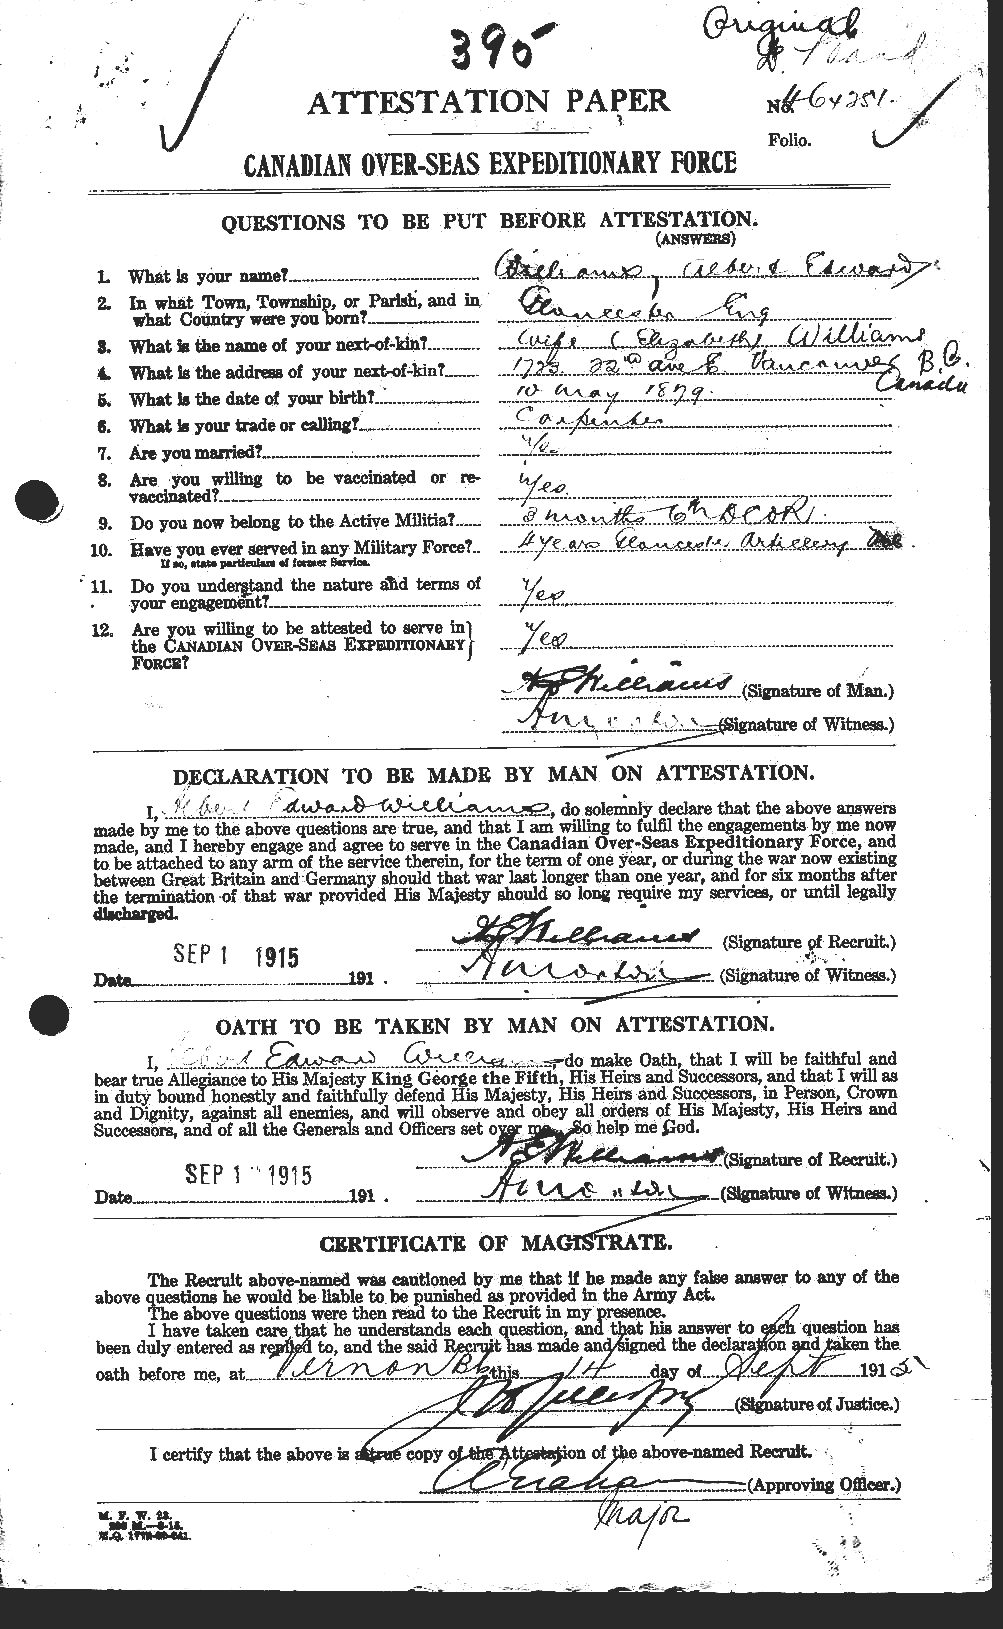 Personnel Records of the First World War - CEF 673783a